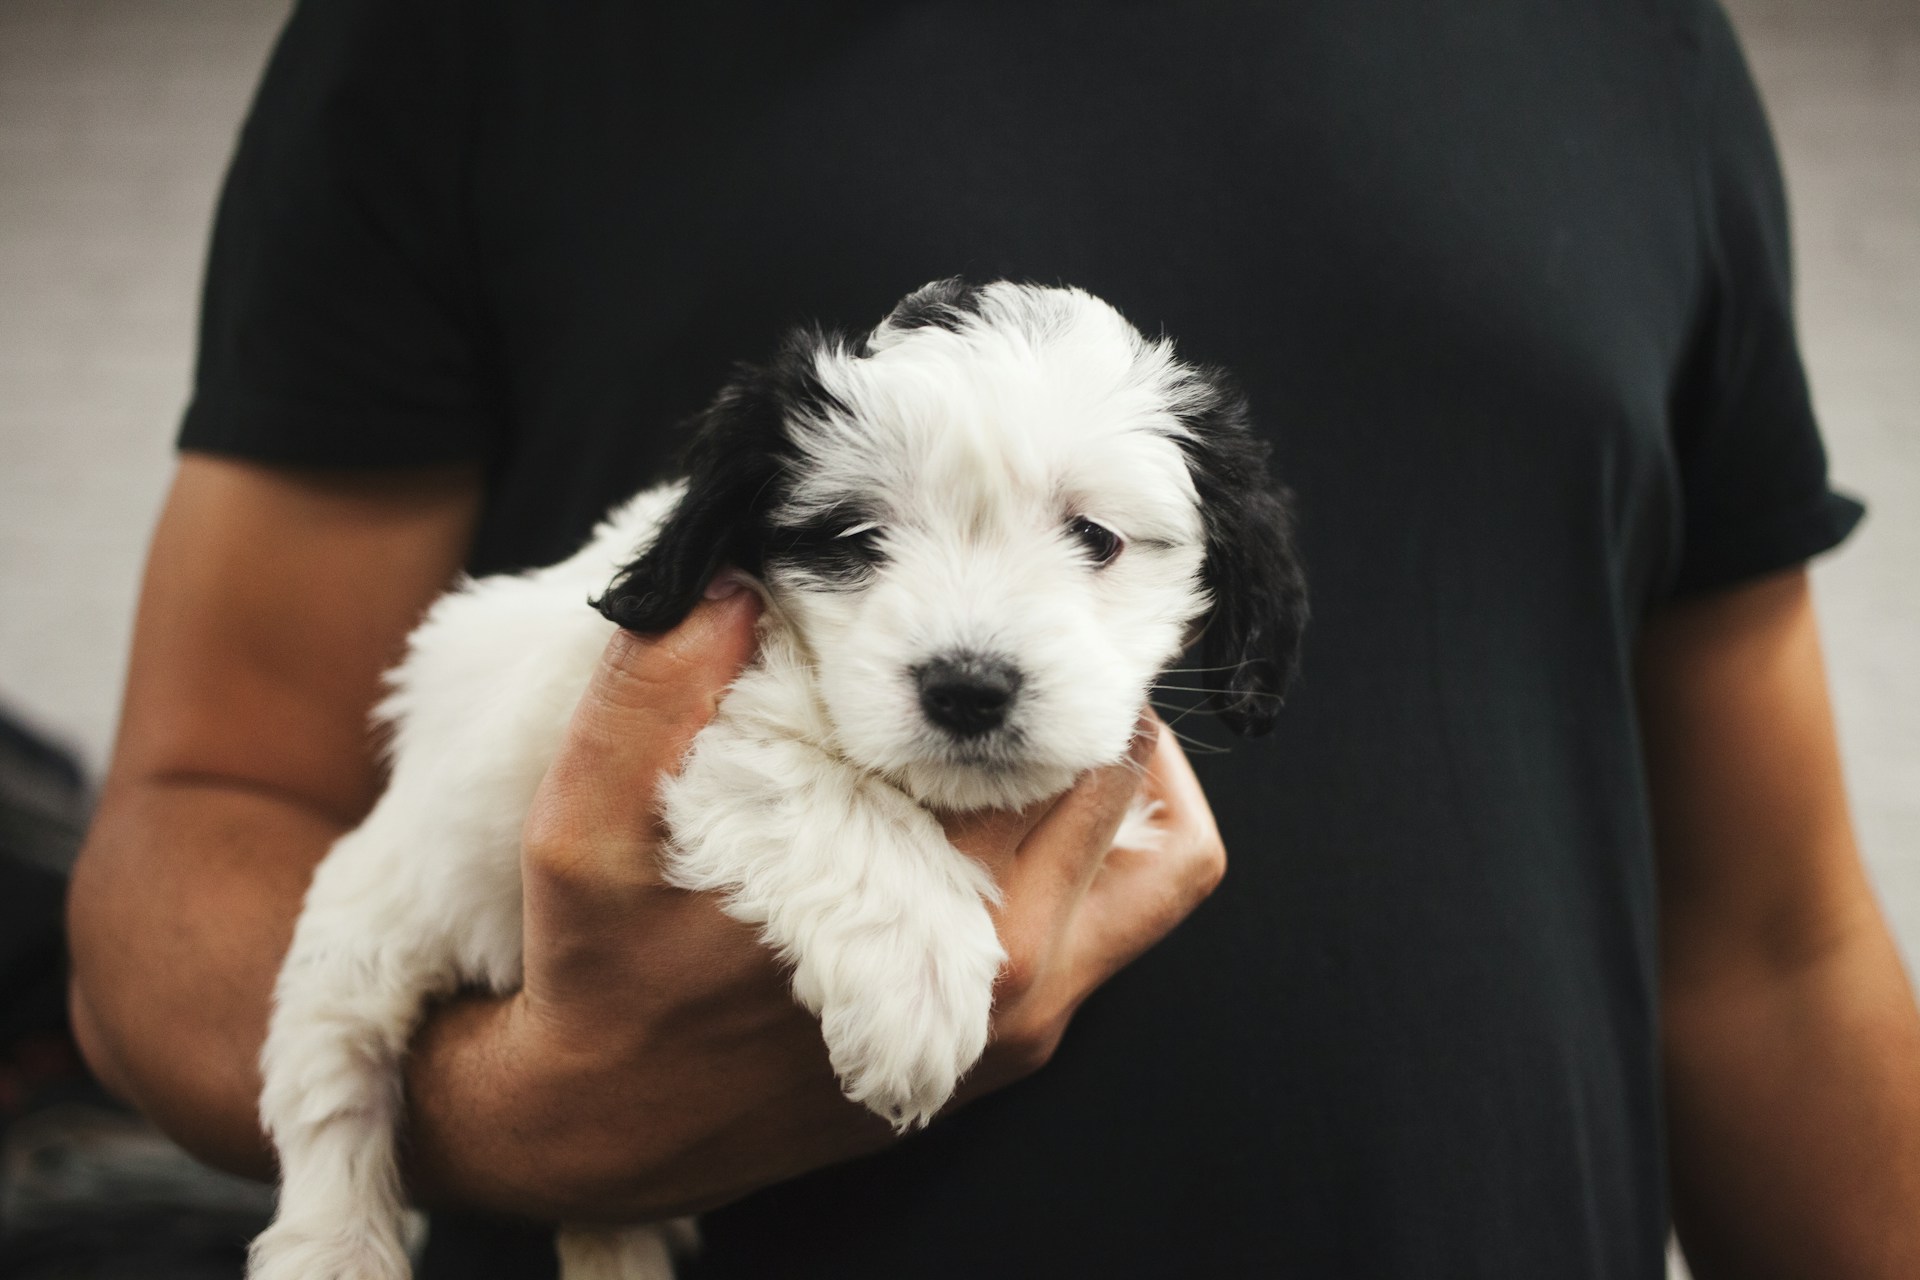 A man wearing a black shirt holding a small white and black puppy